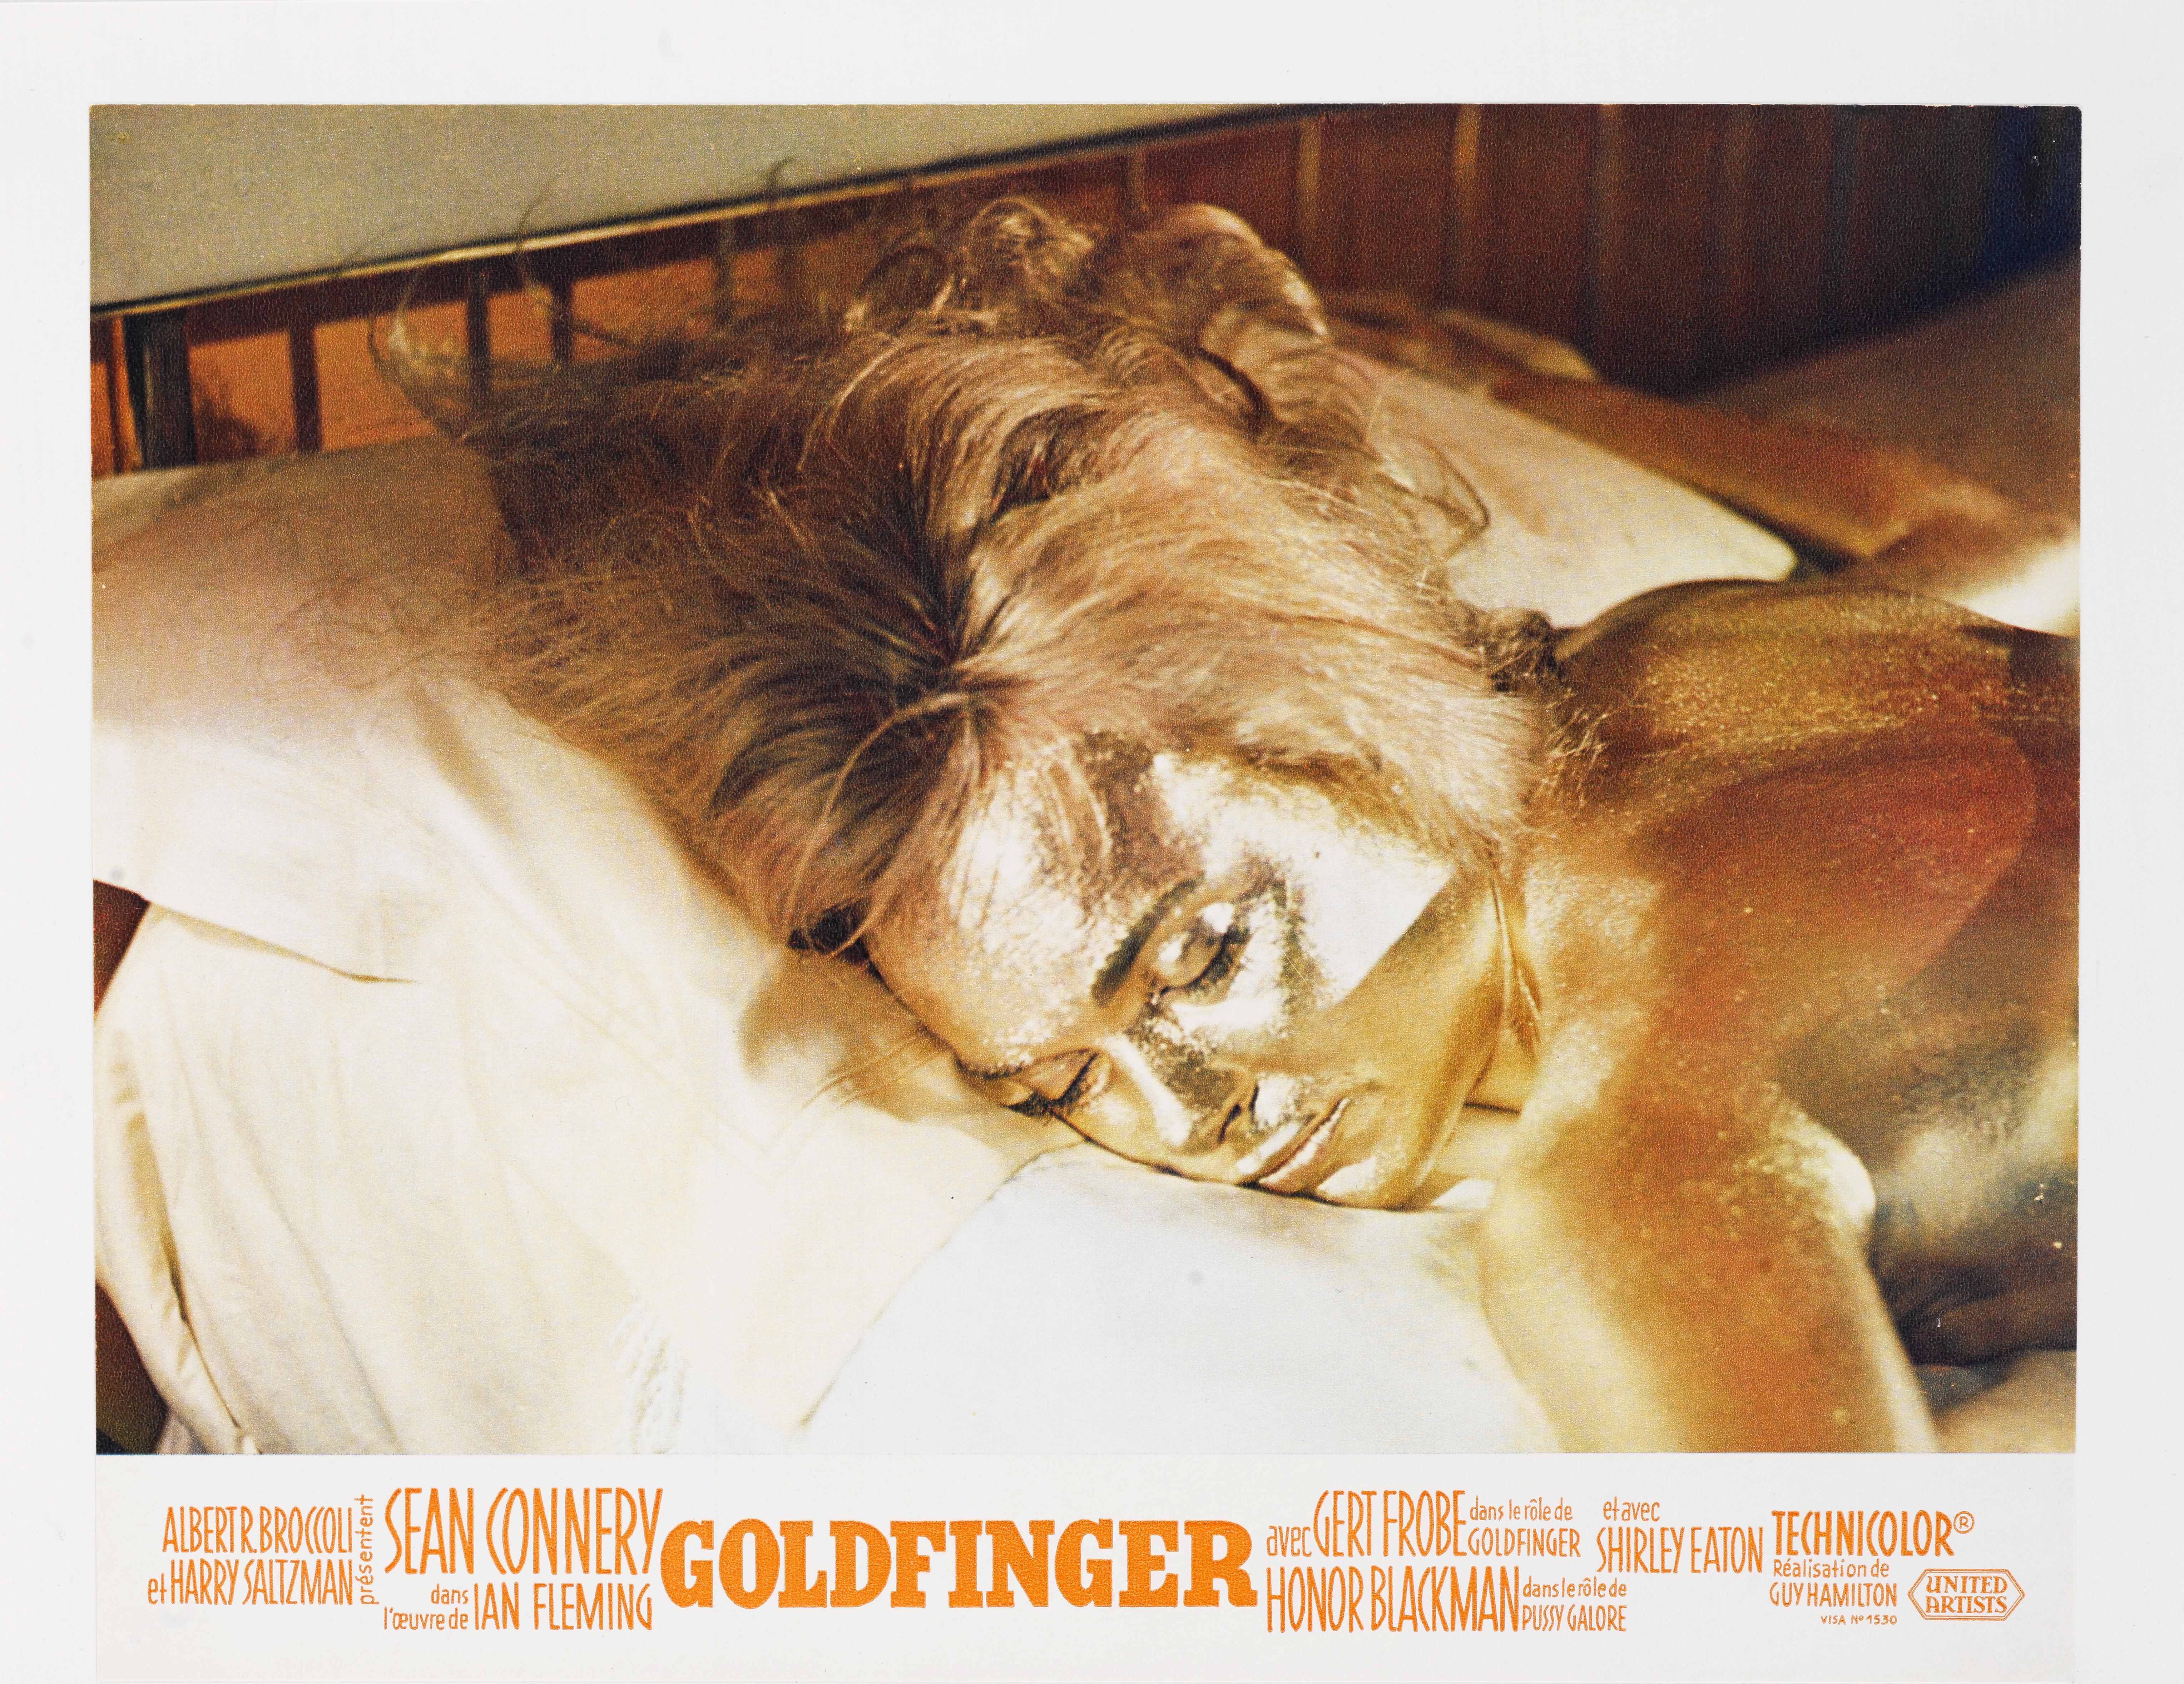 Original French Lobby card for the film Goldfinger. It was the third James Bond film and the third to star Sean Connery as the fictional MI6 agent James Bond.
The film was the first in the series to win an Academy award.
Norman Wanstall won the